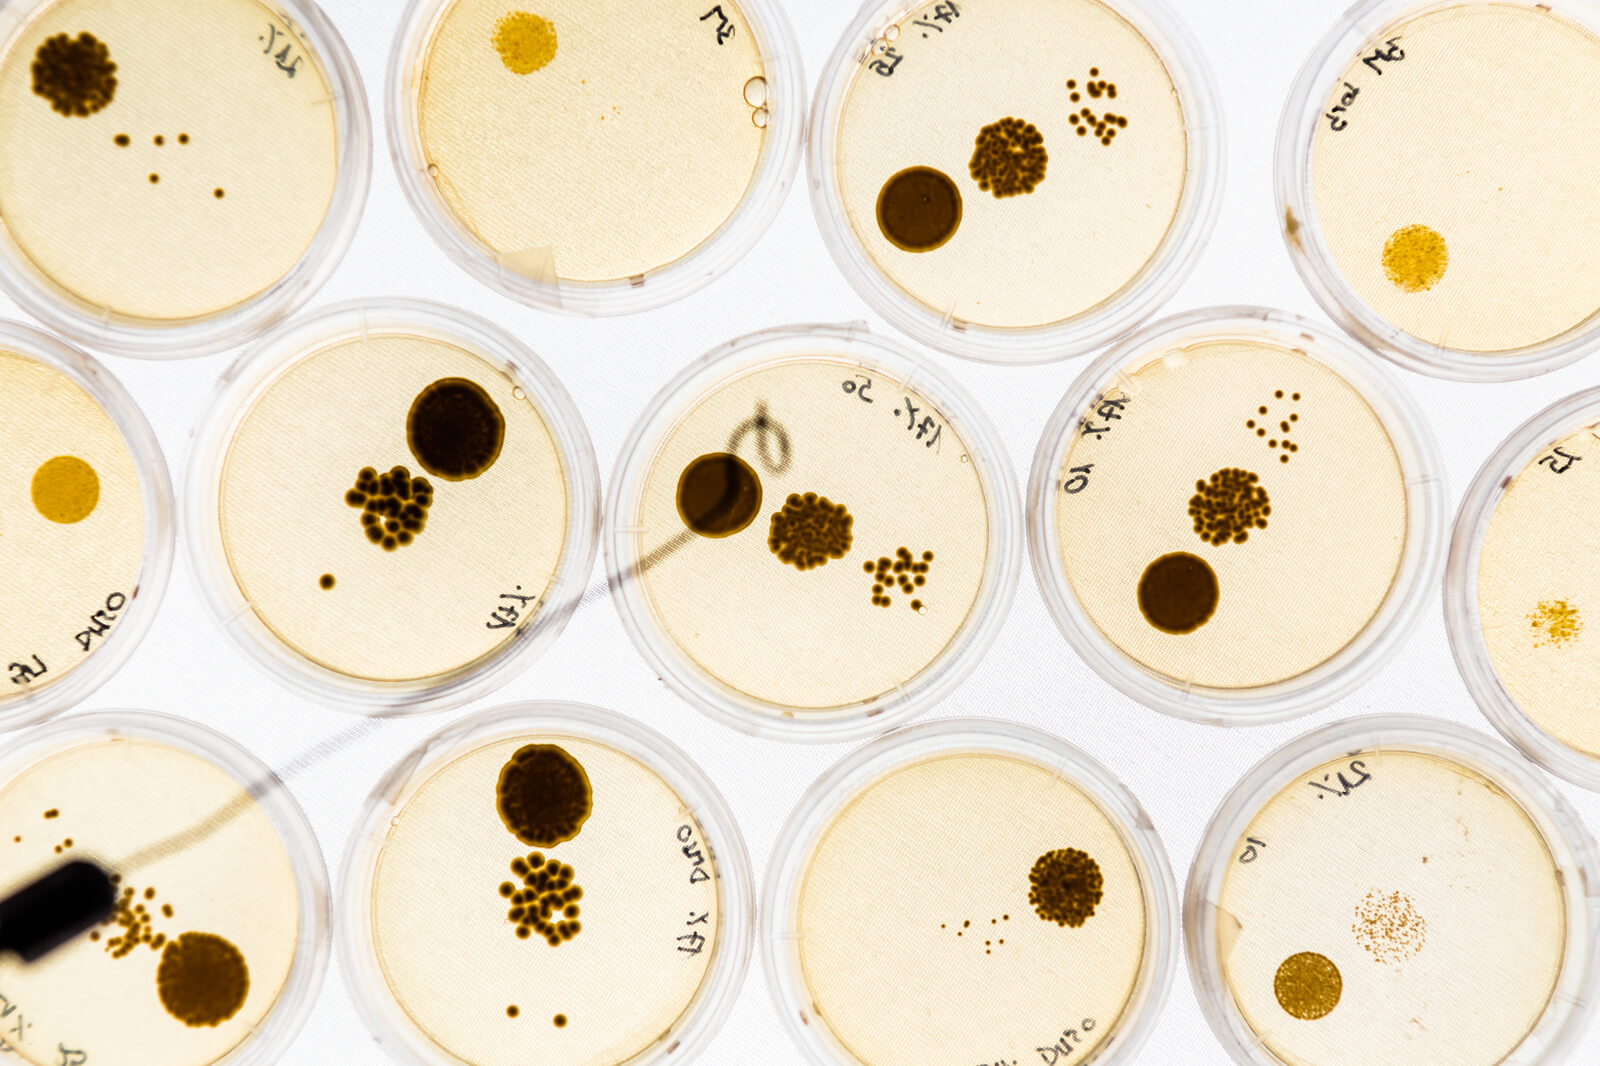 Growing Bacteria in Petri Dishes on agar gel as a part of scientific experiment